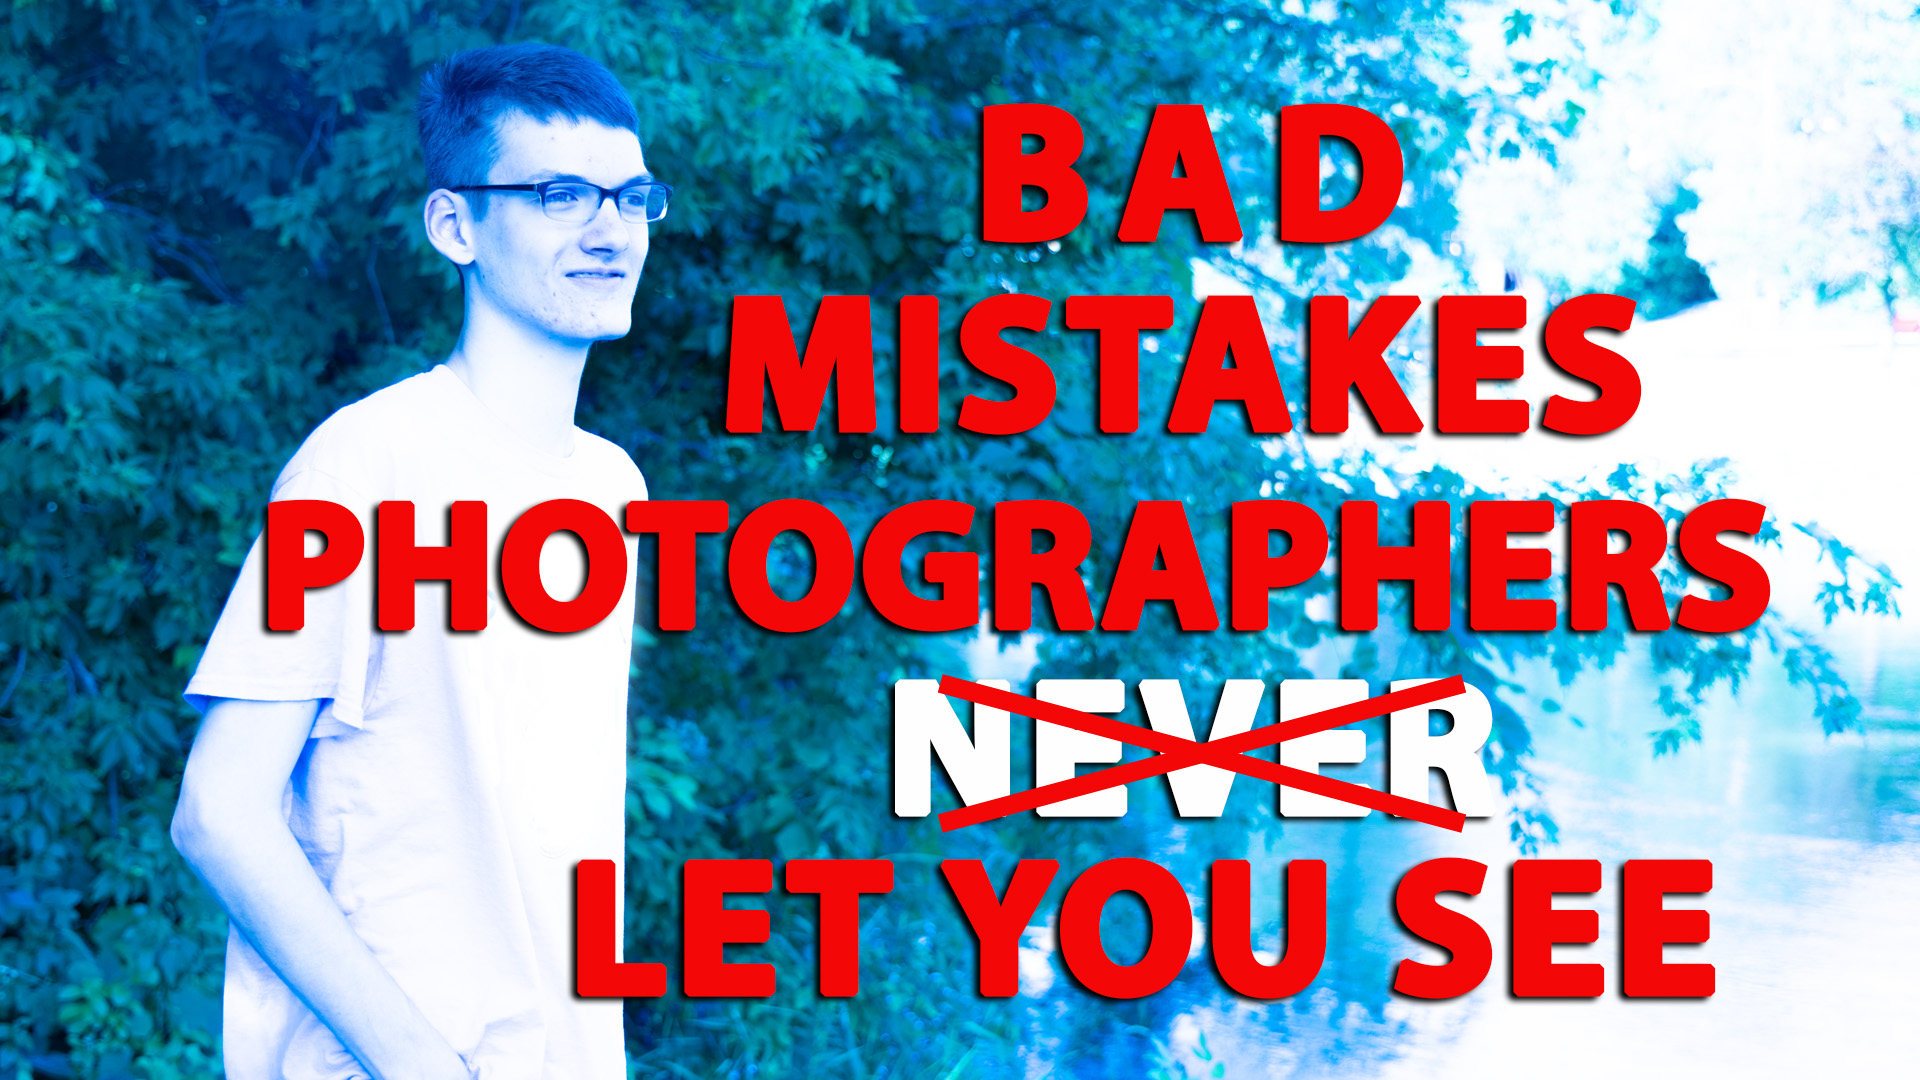 Bad Mistakes Photographers Never Let You See Until Now